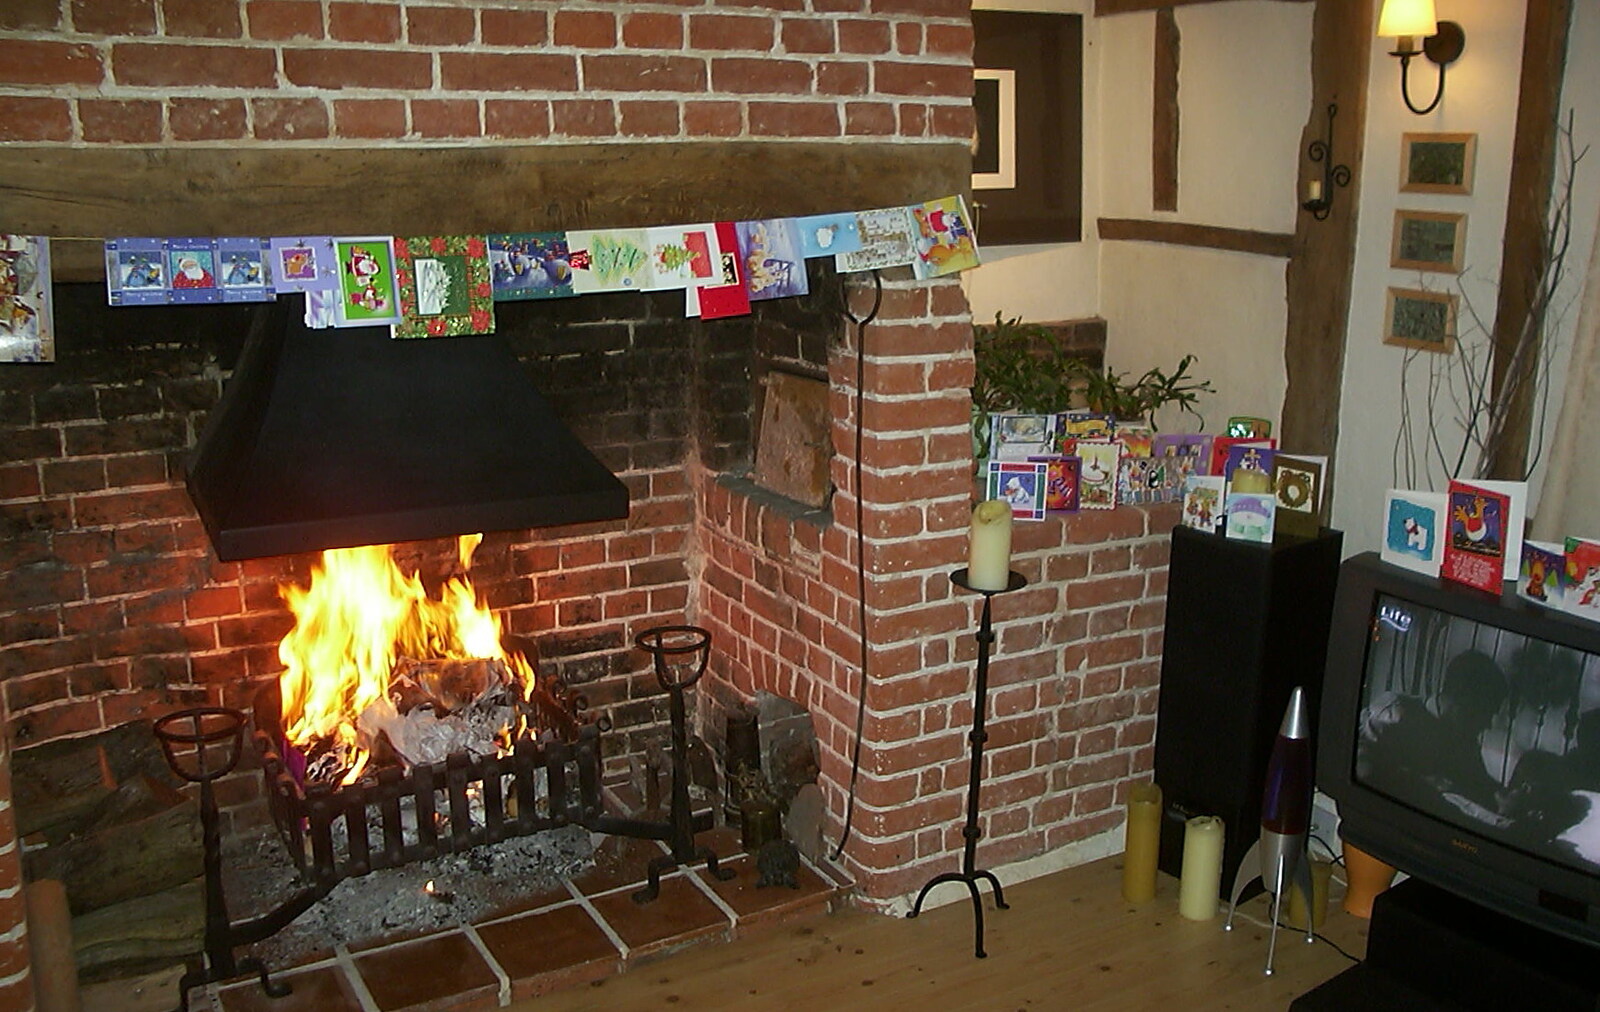 Christmas cards are up around the fireplace from The House in Snow and a Carburettor, Brome, Suffolk - 20th December 2002